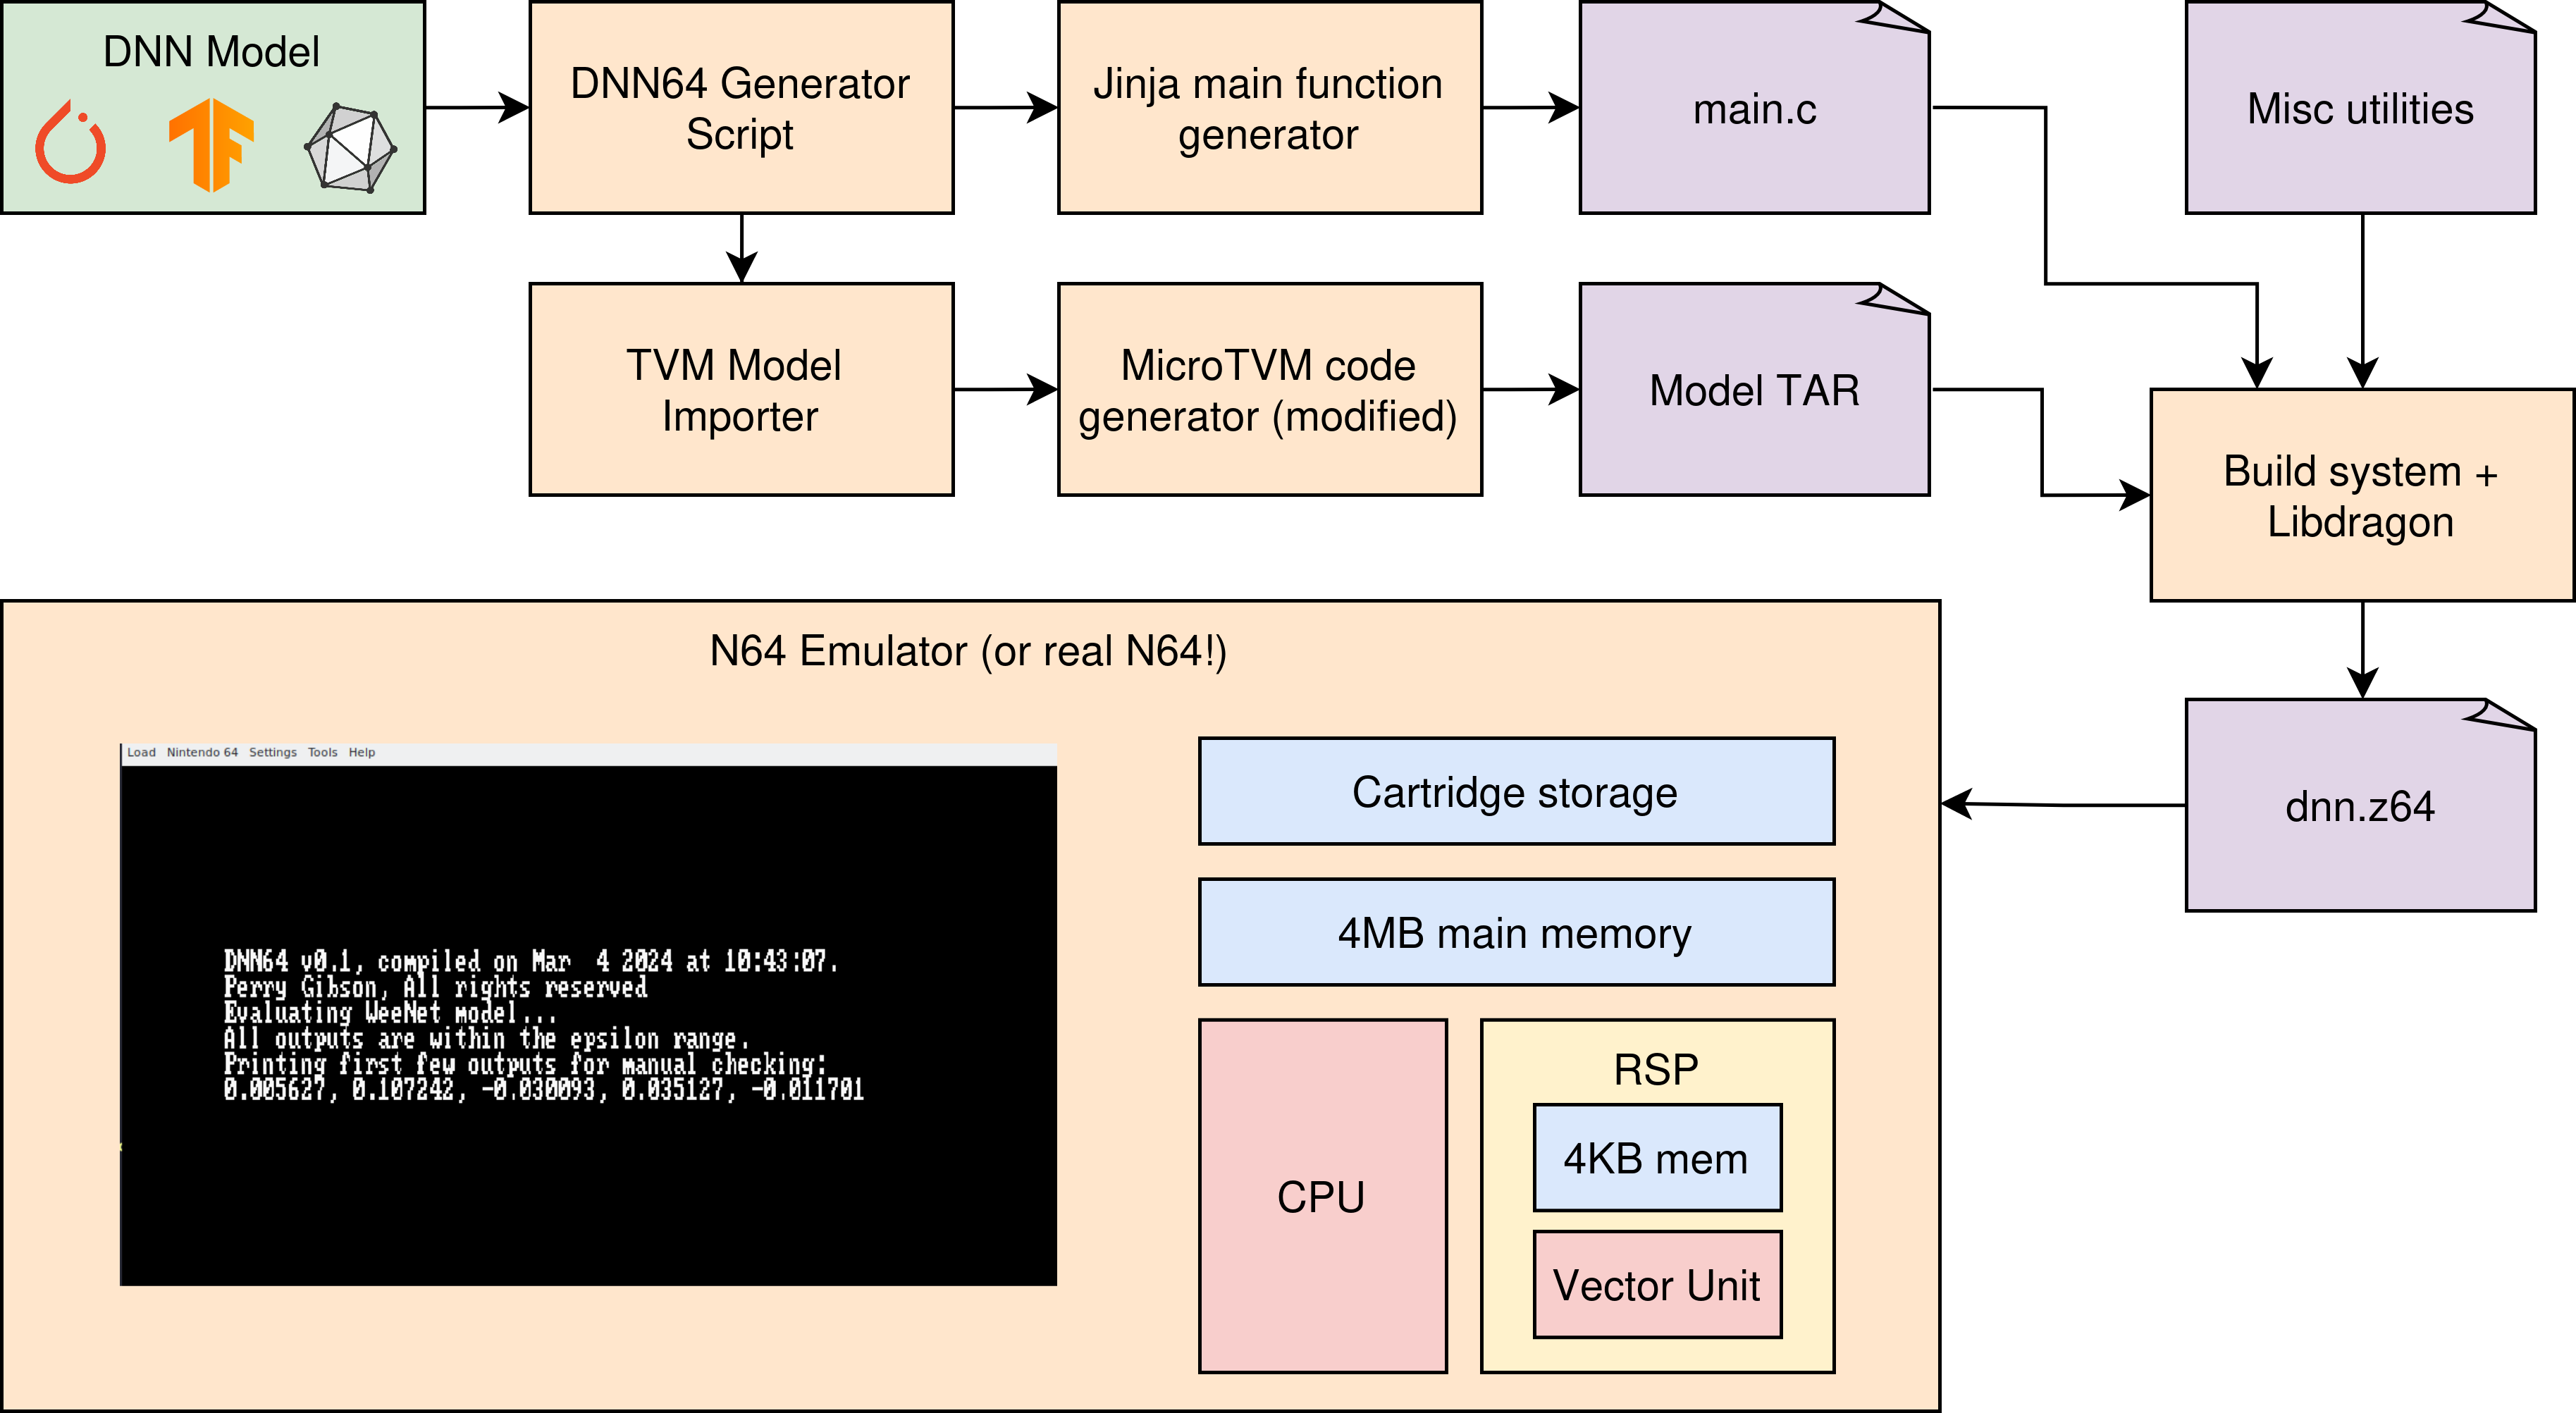 High-level overview of the DNN64 workflow. Boxes flow from a DNN Model to the N64 emulator. Steps include passing the model into the DNN64 Generator Script, using the MicroTVM code generator (modified), generating a main.c file with Jinja, and compiling it with Build system + Libdragon